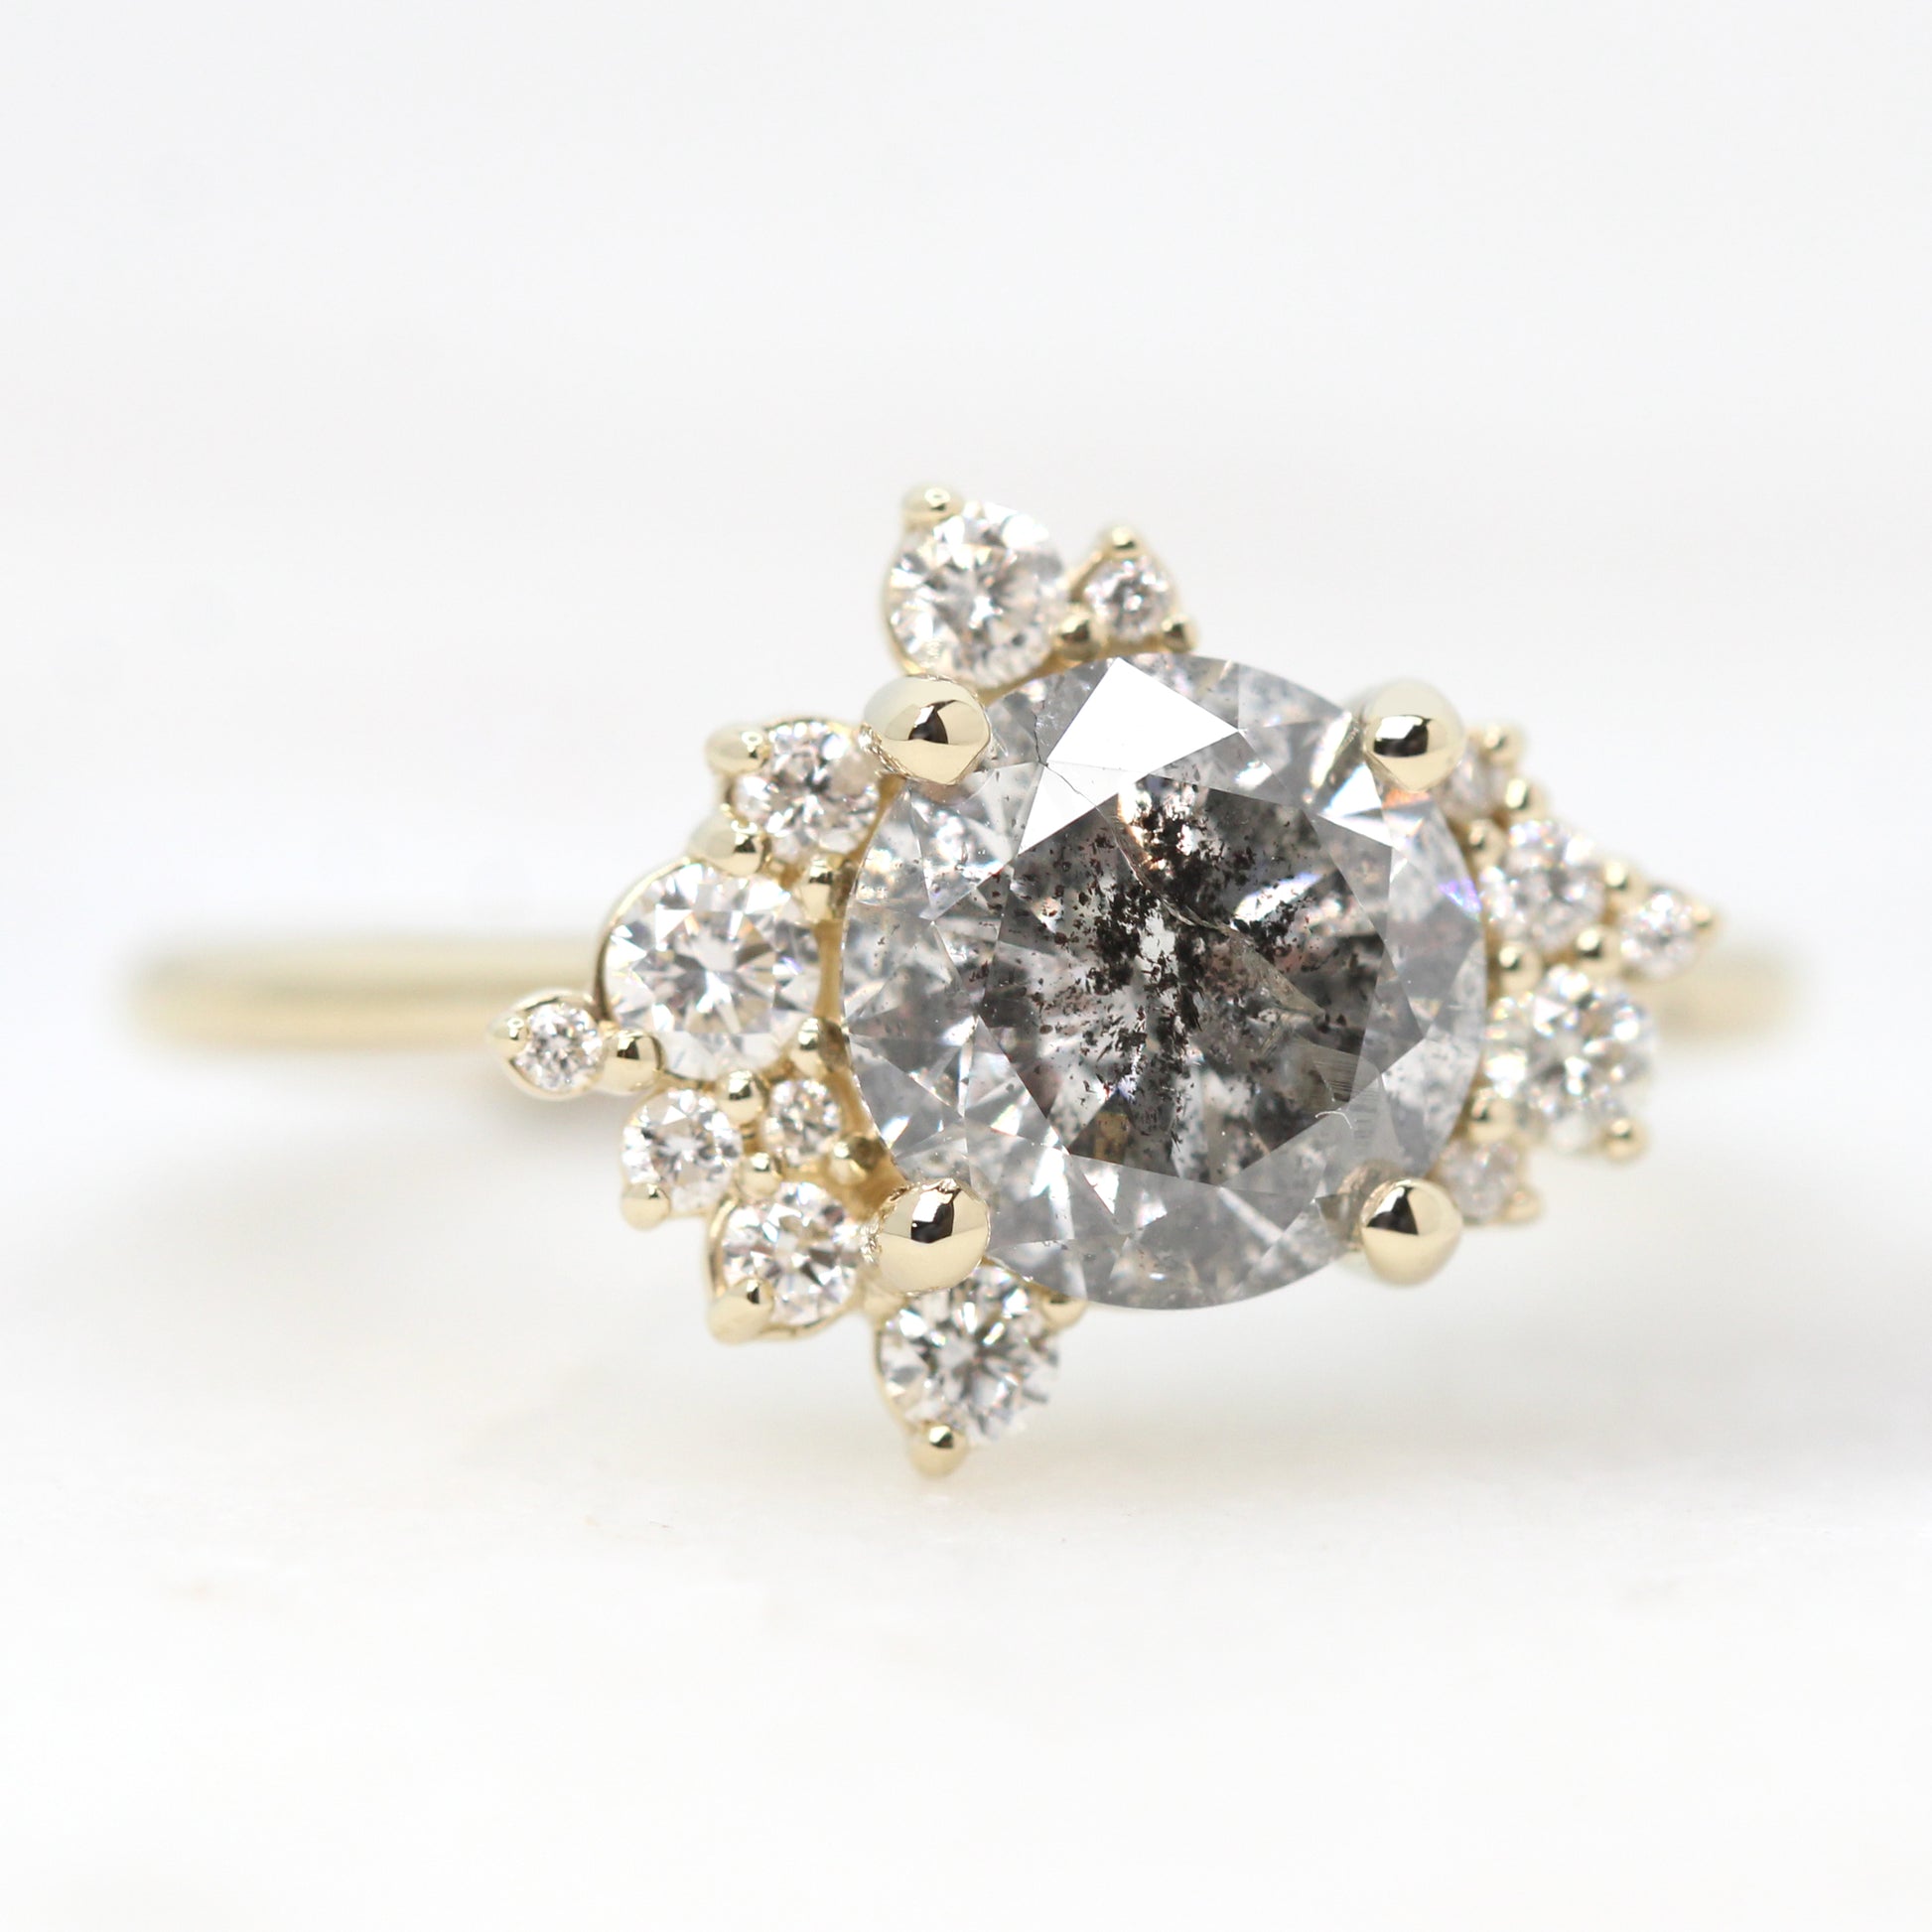 Orion Ring with a 1.61 Carat Round Dark Gray Celestial Diamond and White Accent Diamonds in 14k Yellow Gold - Ready to Size and Ship - Midwinter Co. Alternative Bridal Rings and Modern Fine Jewelry